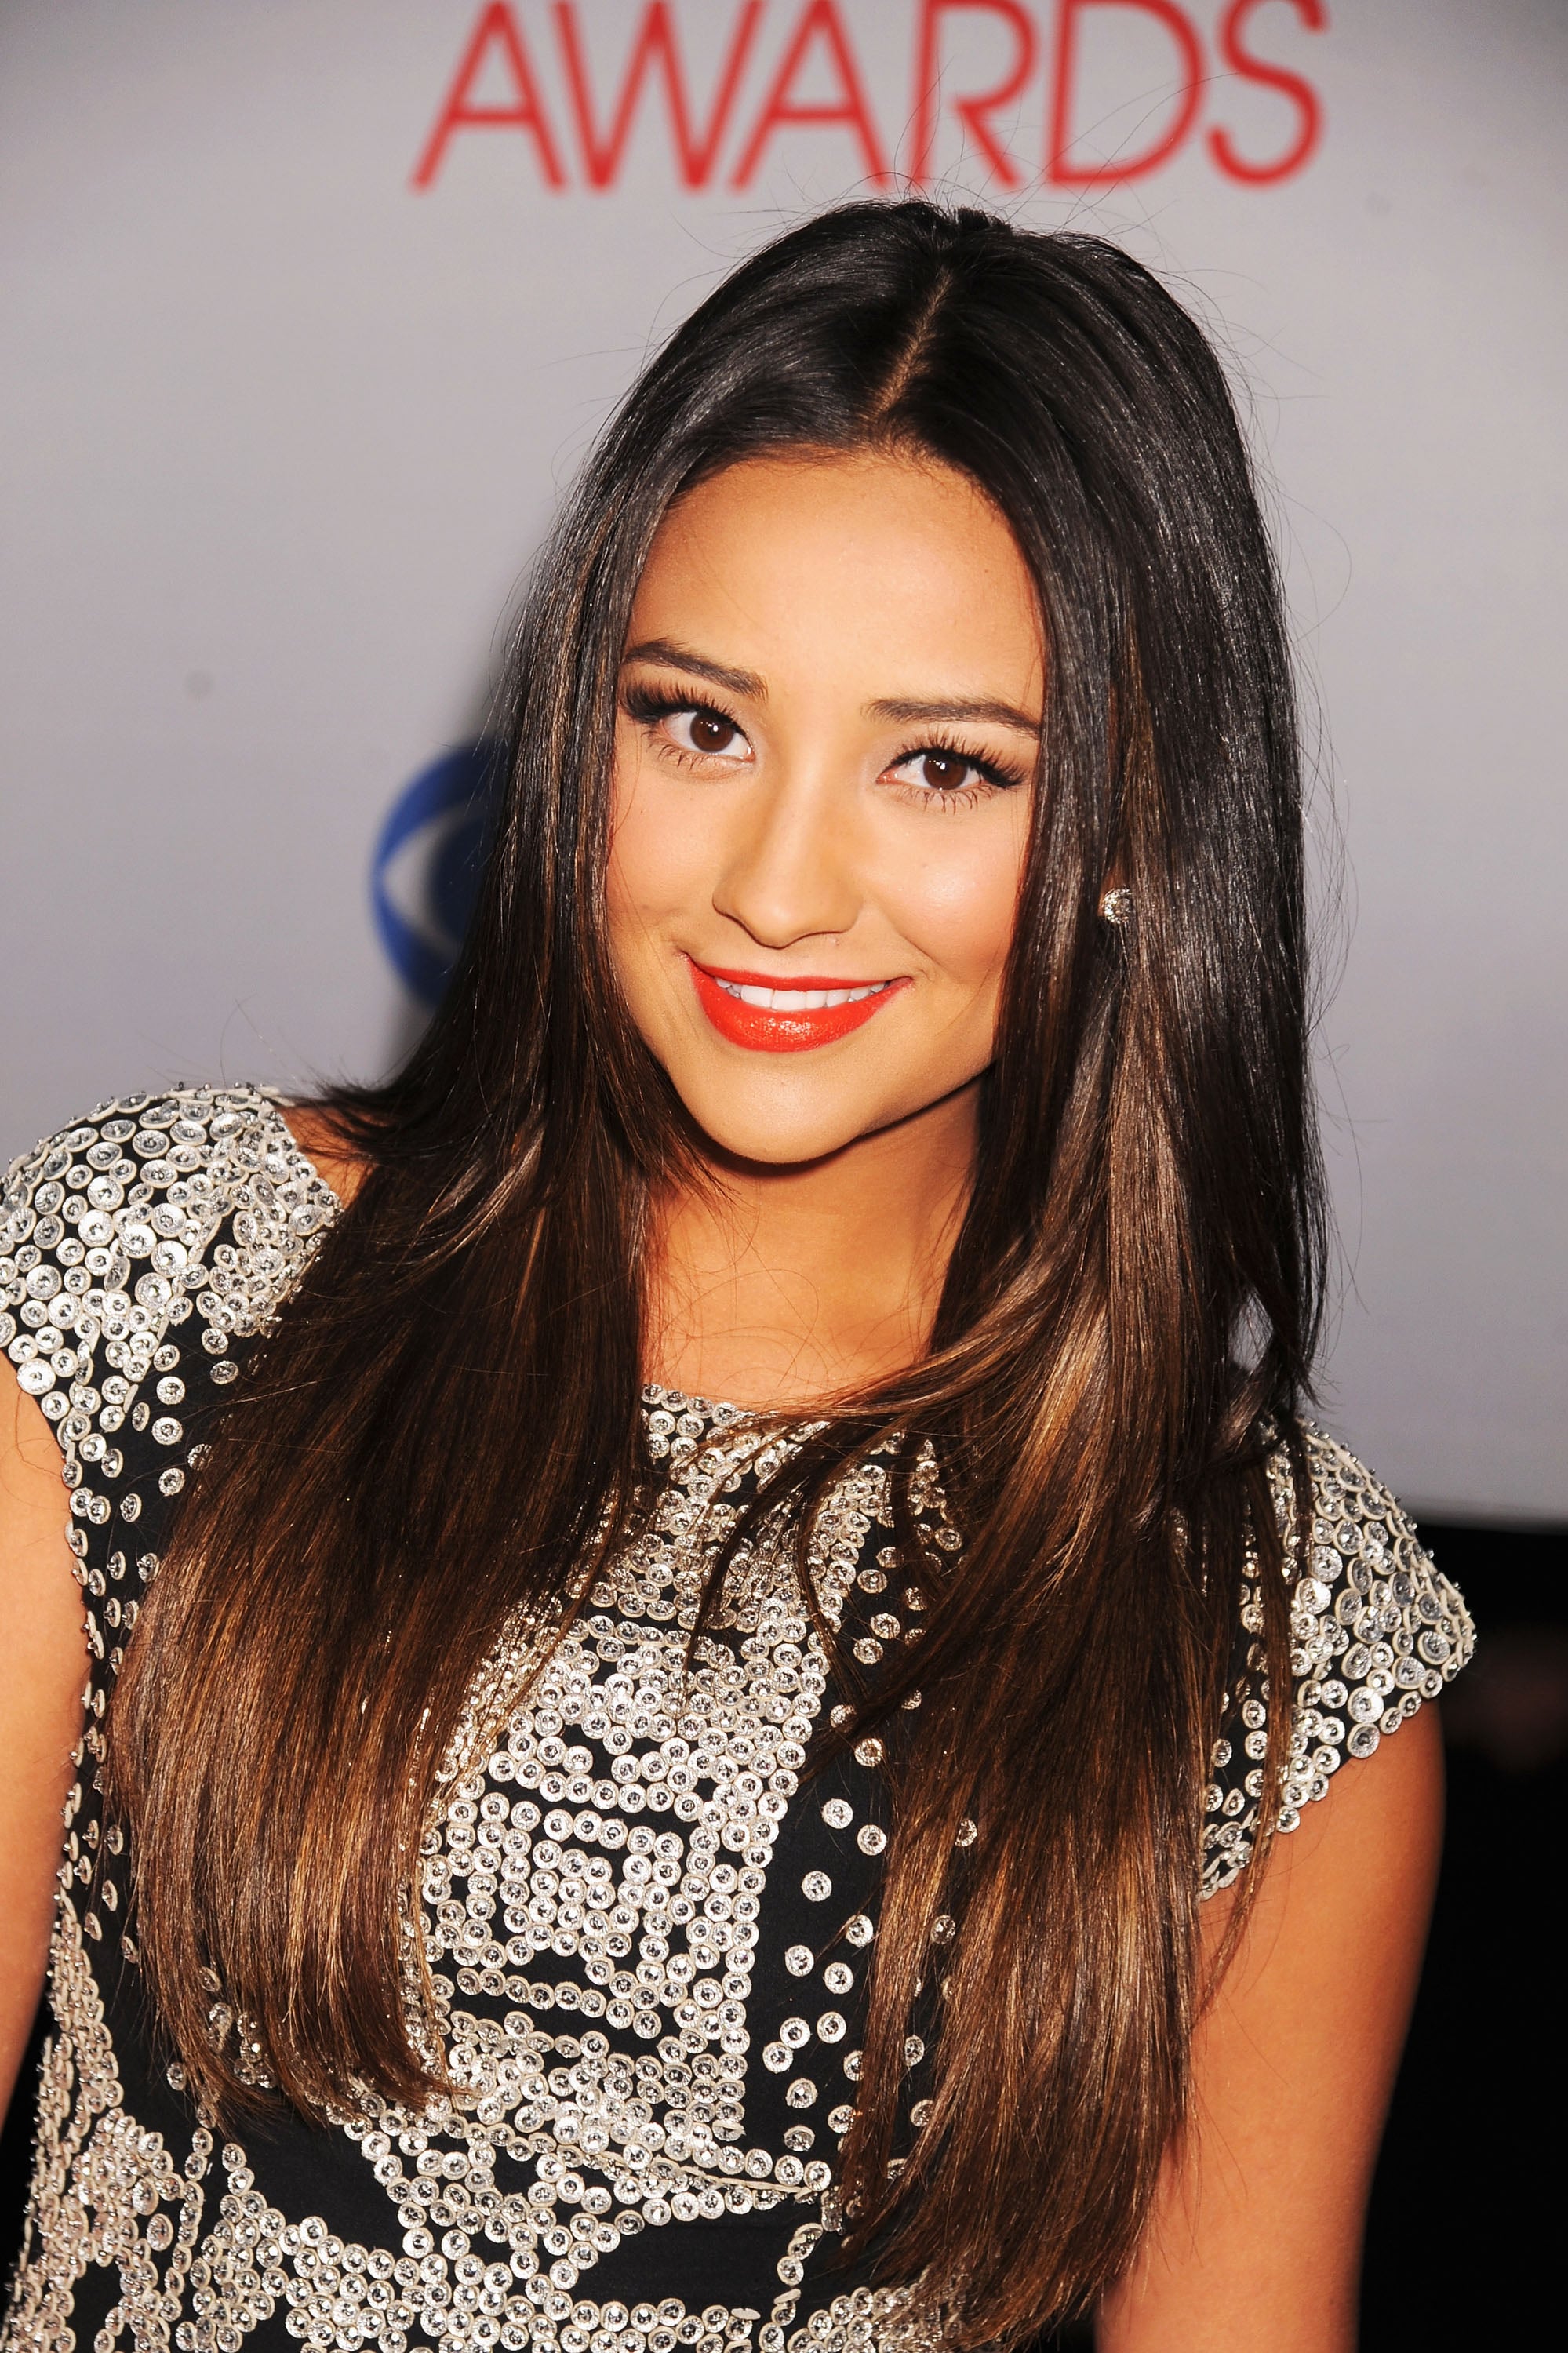 Shay Mitchell at the 2012 People's Choice Awards in LA.